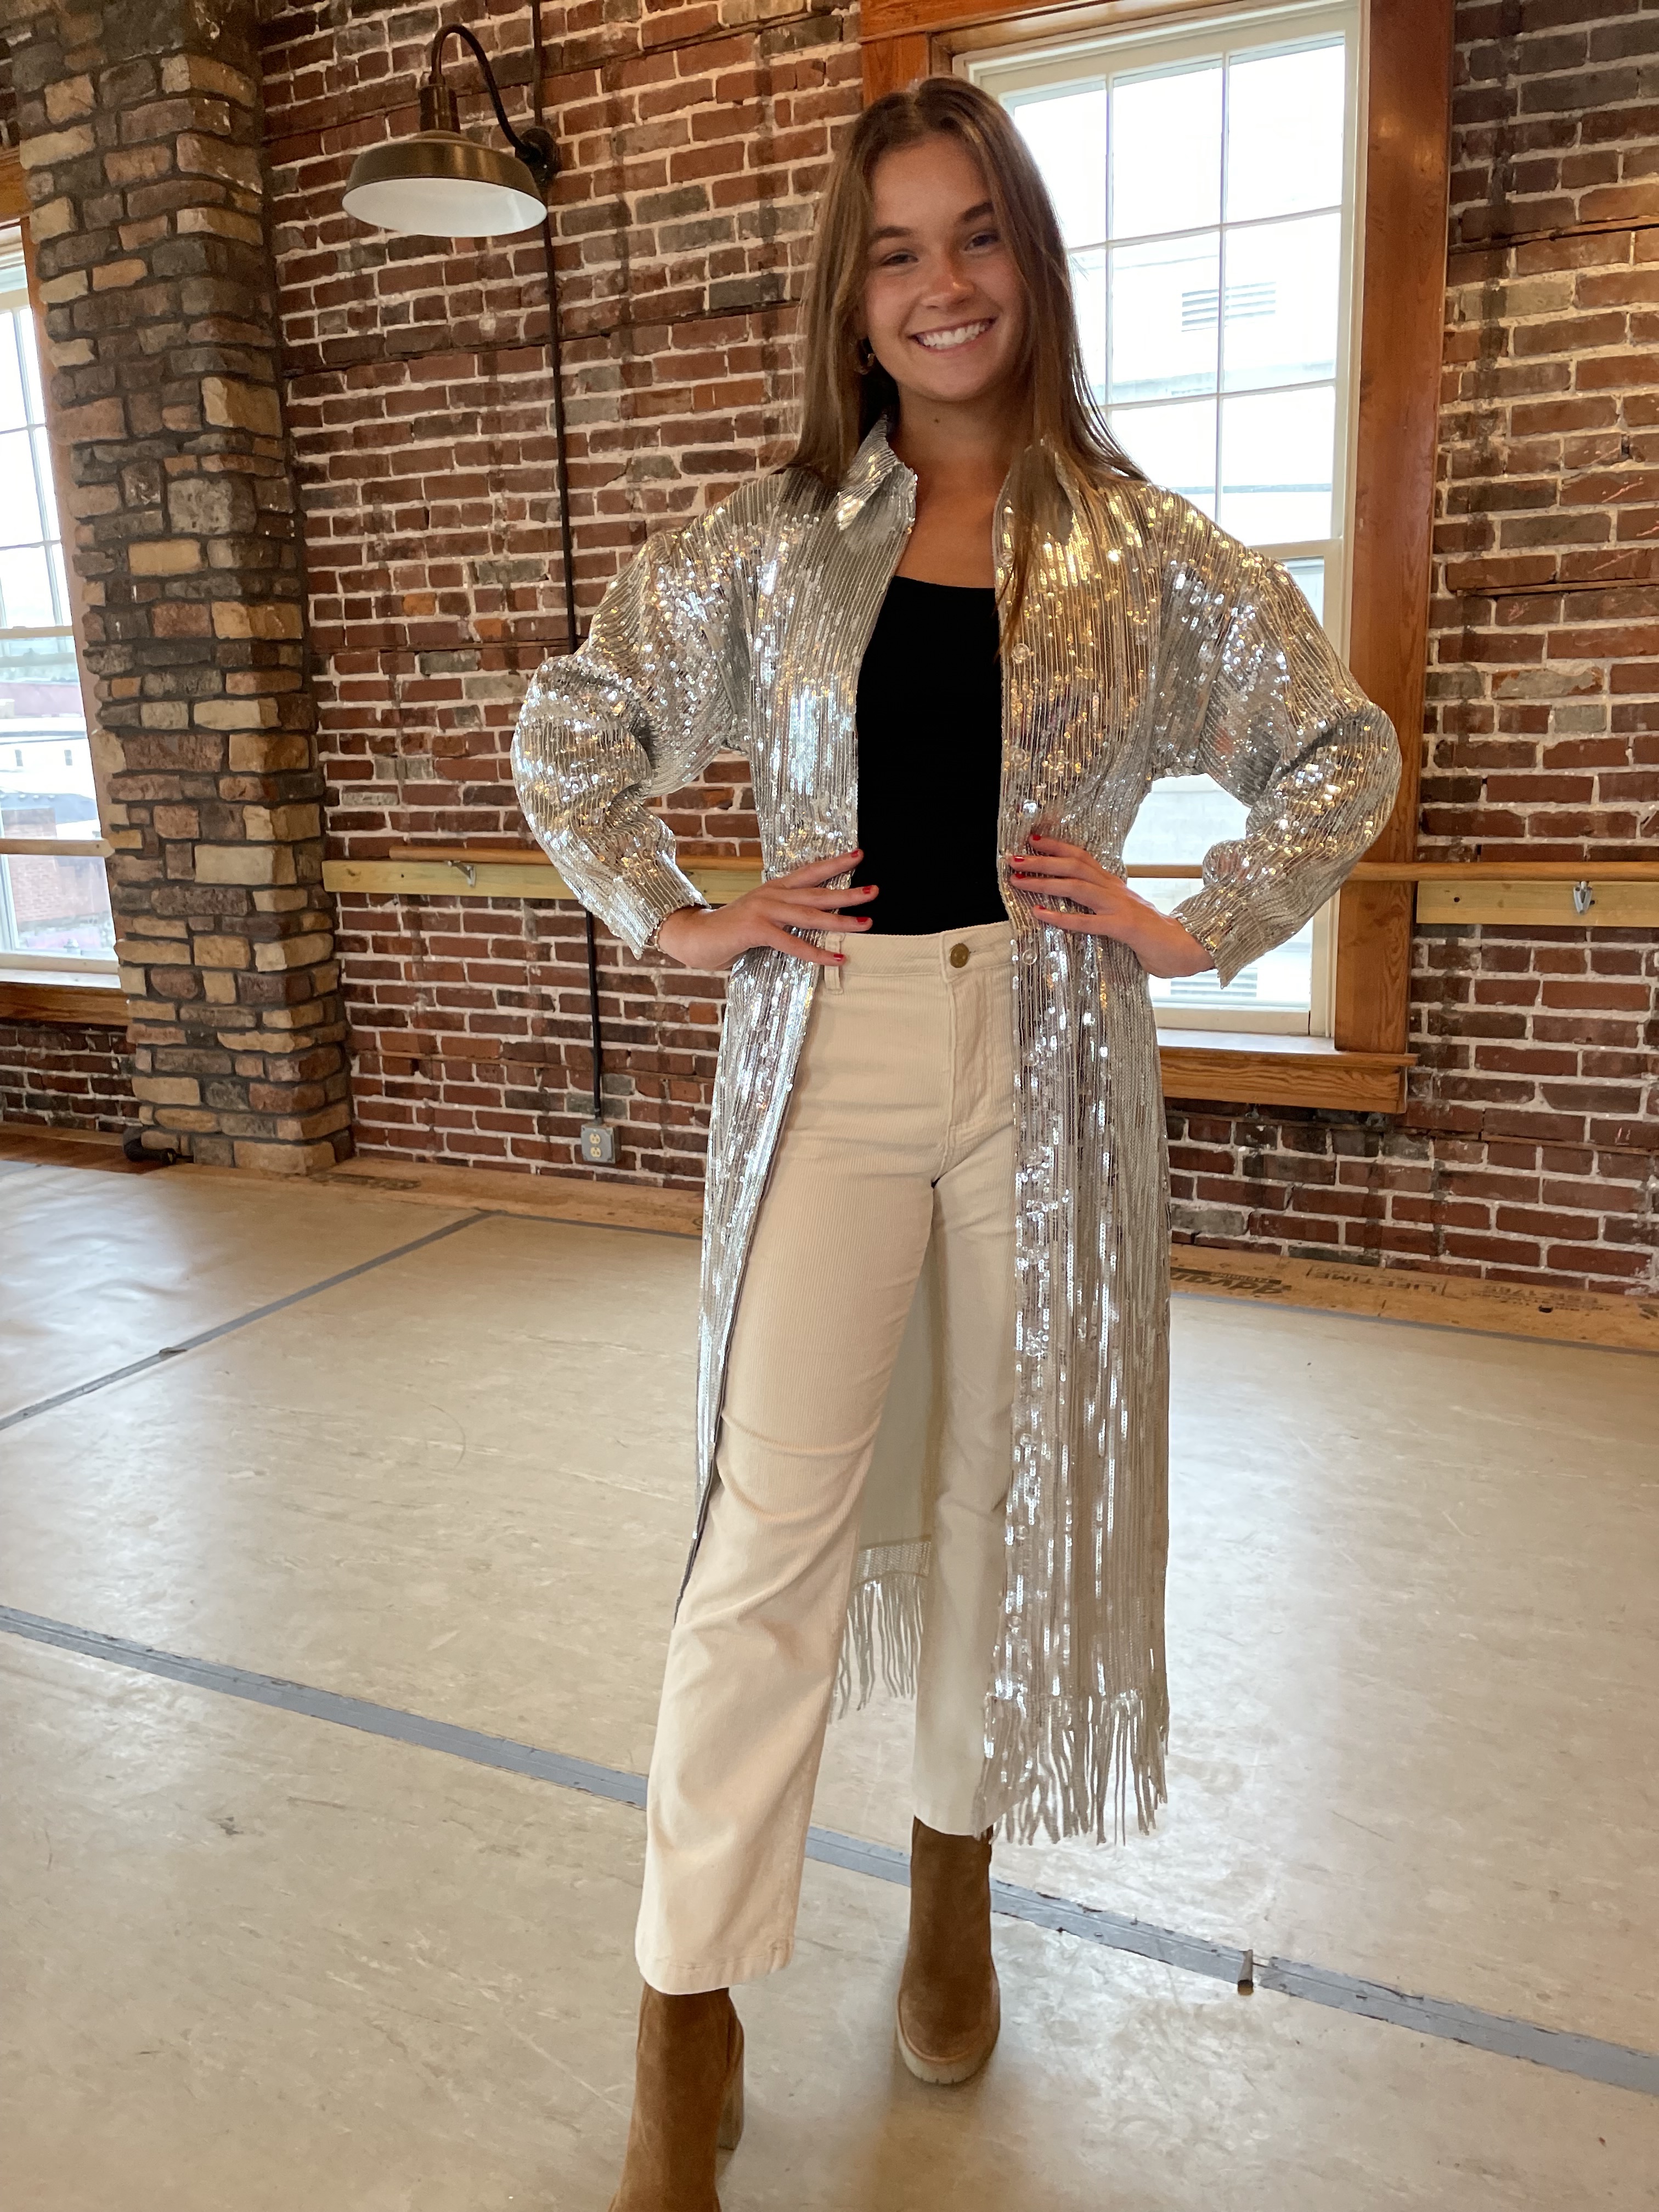 Sequined Duster Jacket In Silver